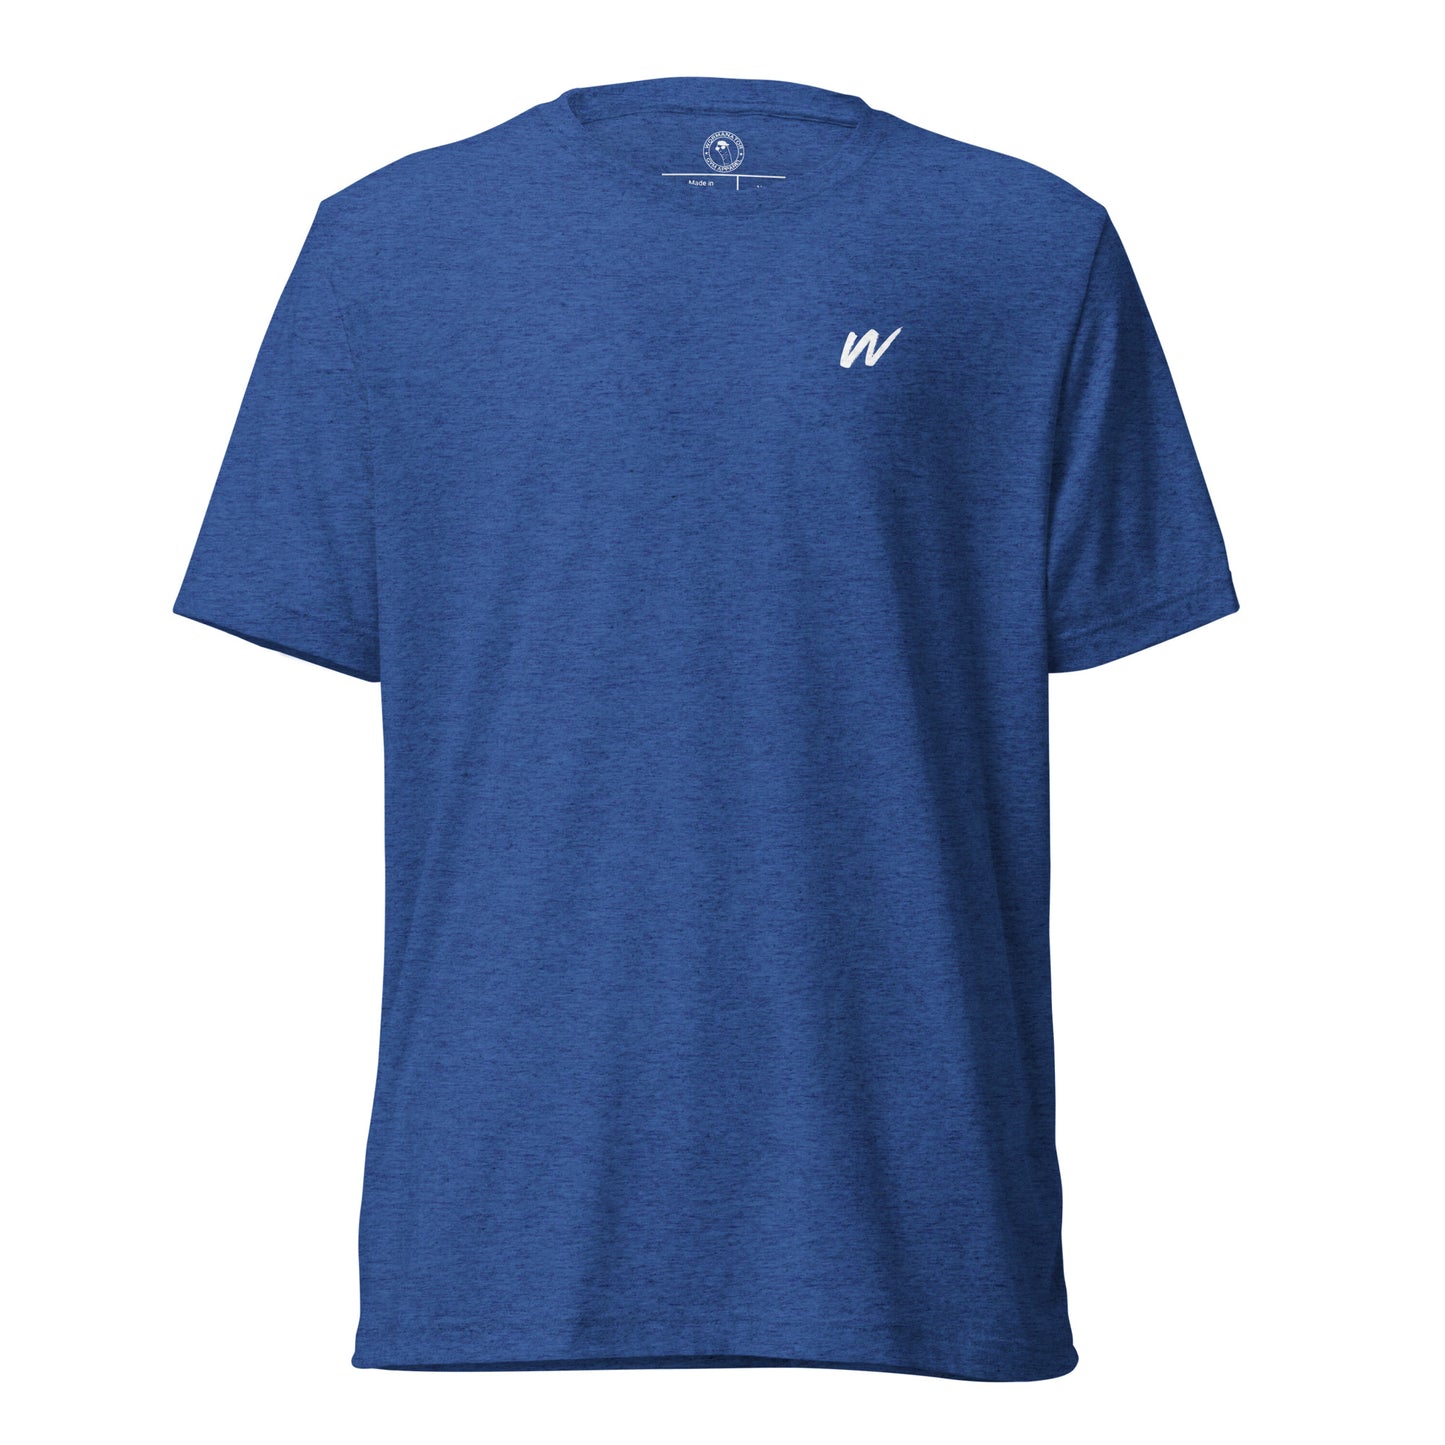 Win the Day T-Shirt in True Royal Triblend